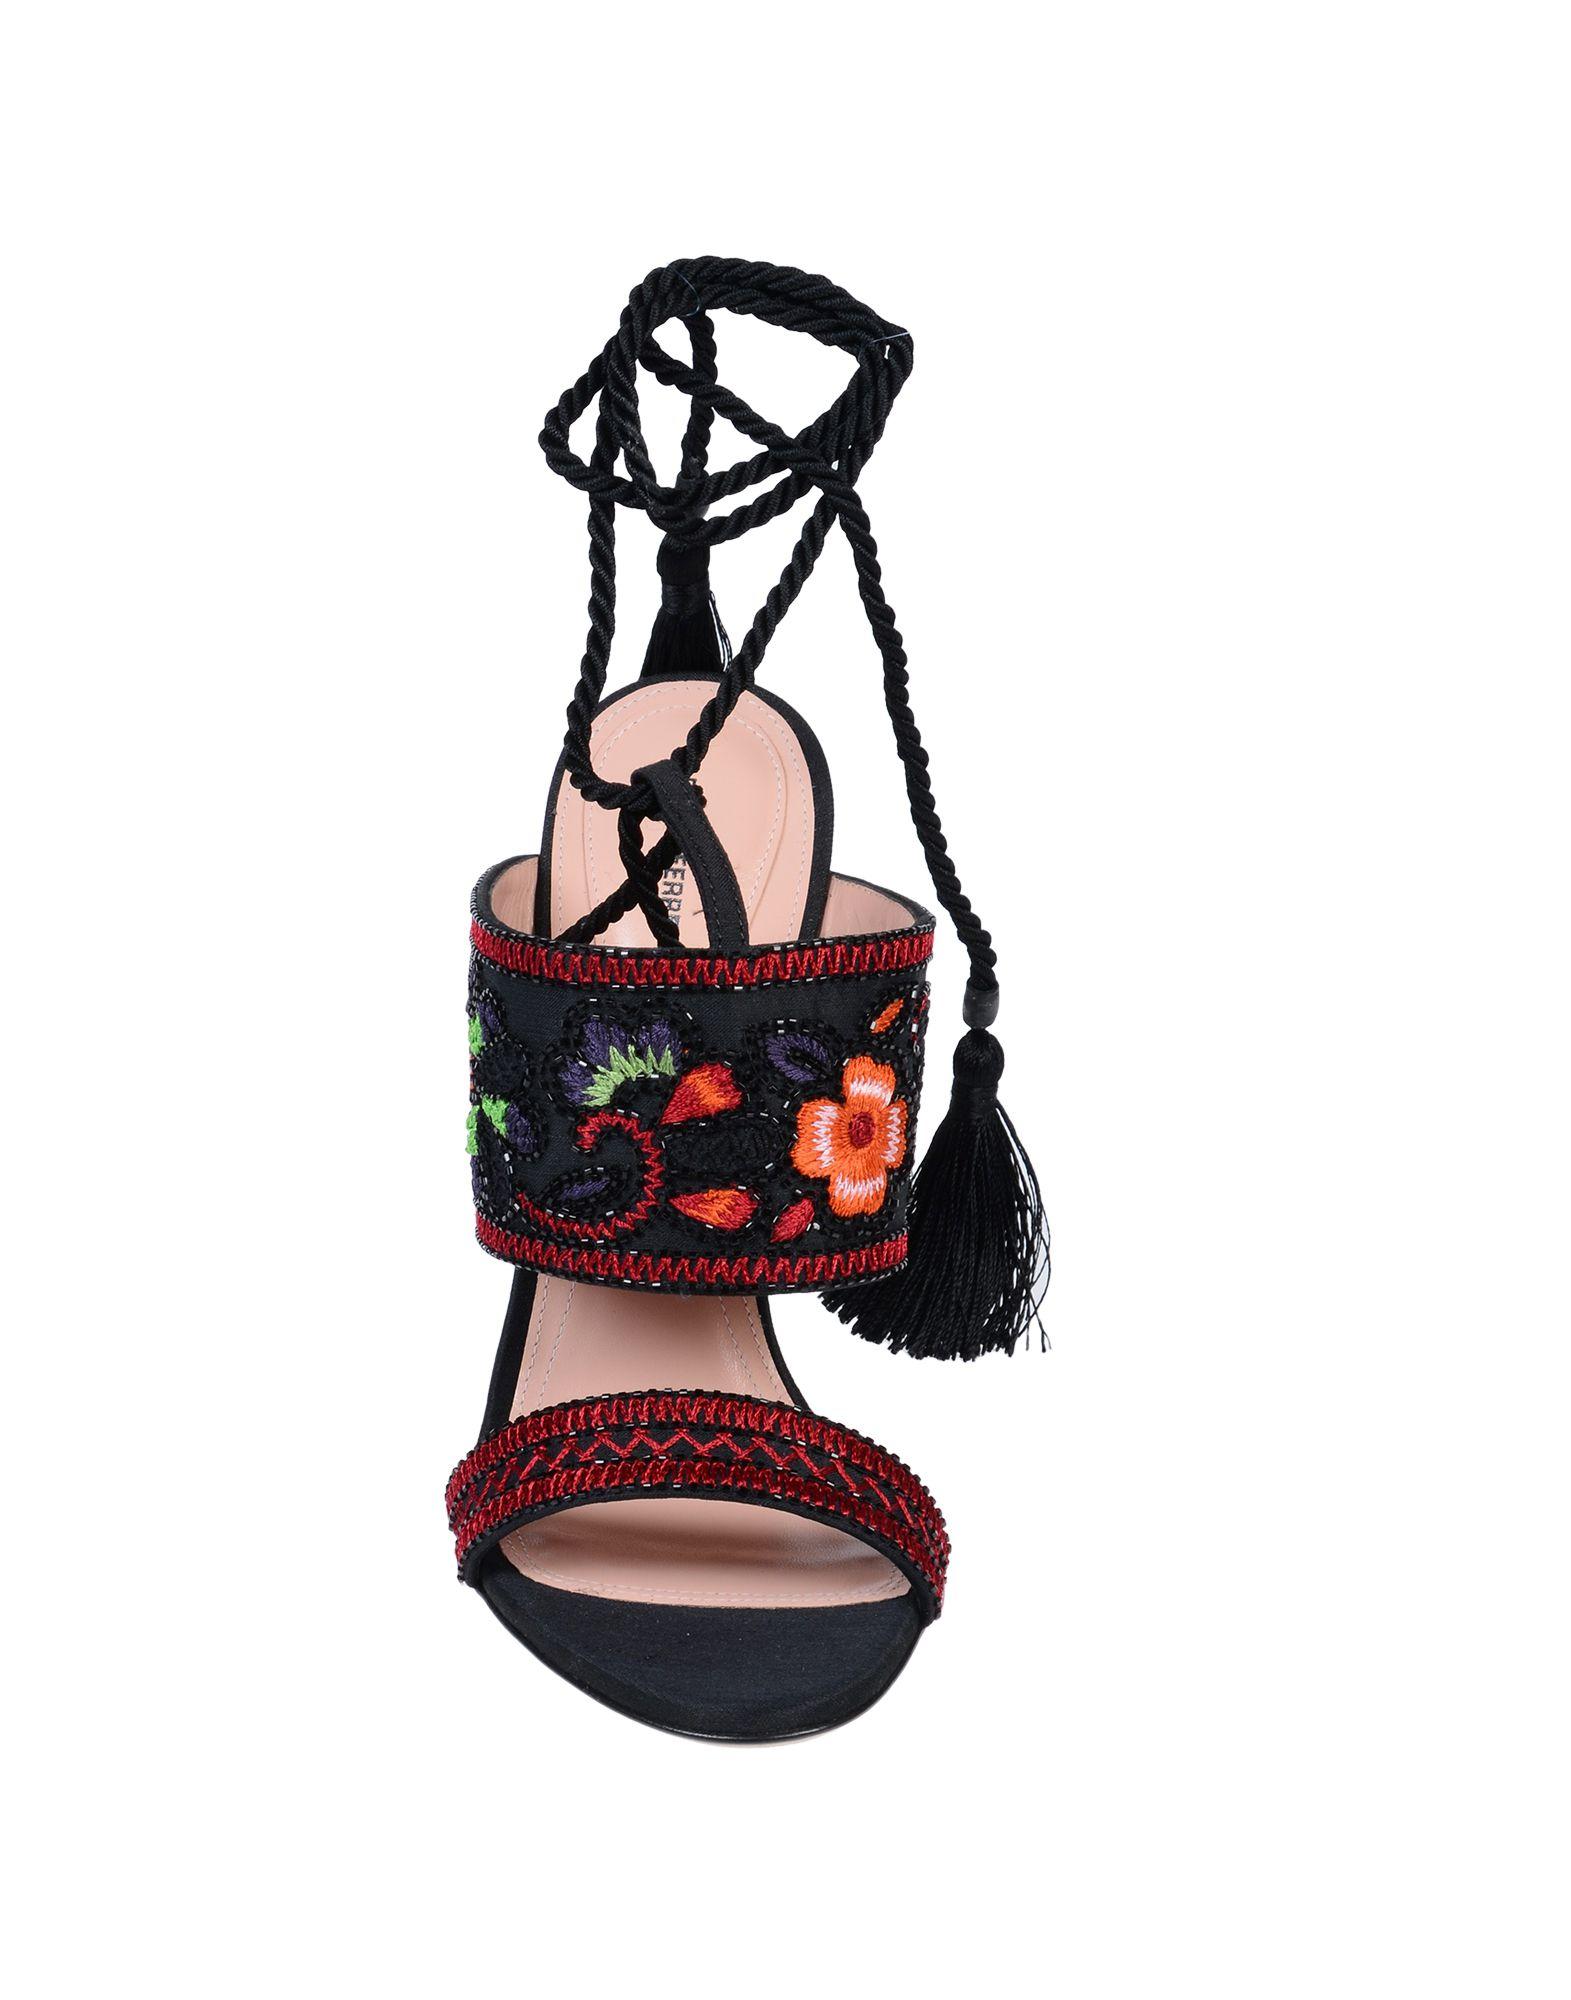 New Alberta Ferretti Beaded and Embroidered Satin Sandals
S/S 2017 Collection
Designer size 39 - US 9 ( other sizes available - please just ask ).
Embroidered details, lace up closure with tassels, 4 inches stiletto heel.
Leather lining and